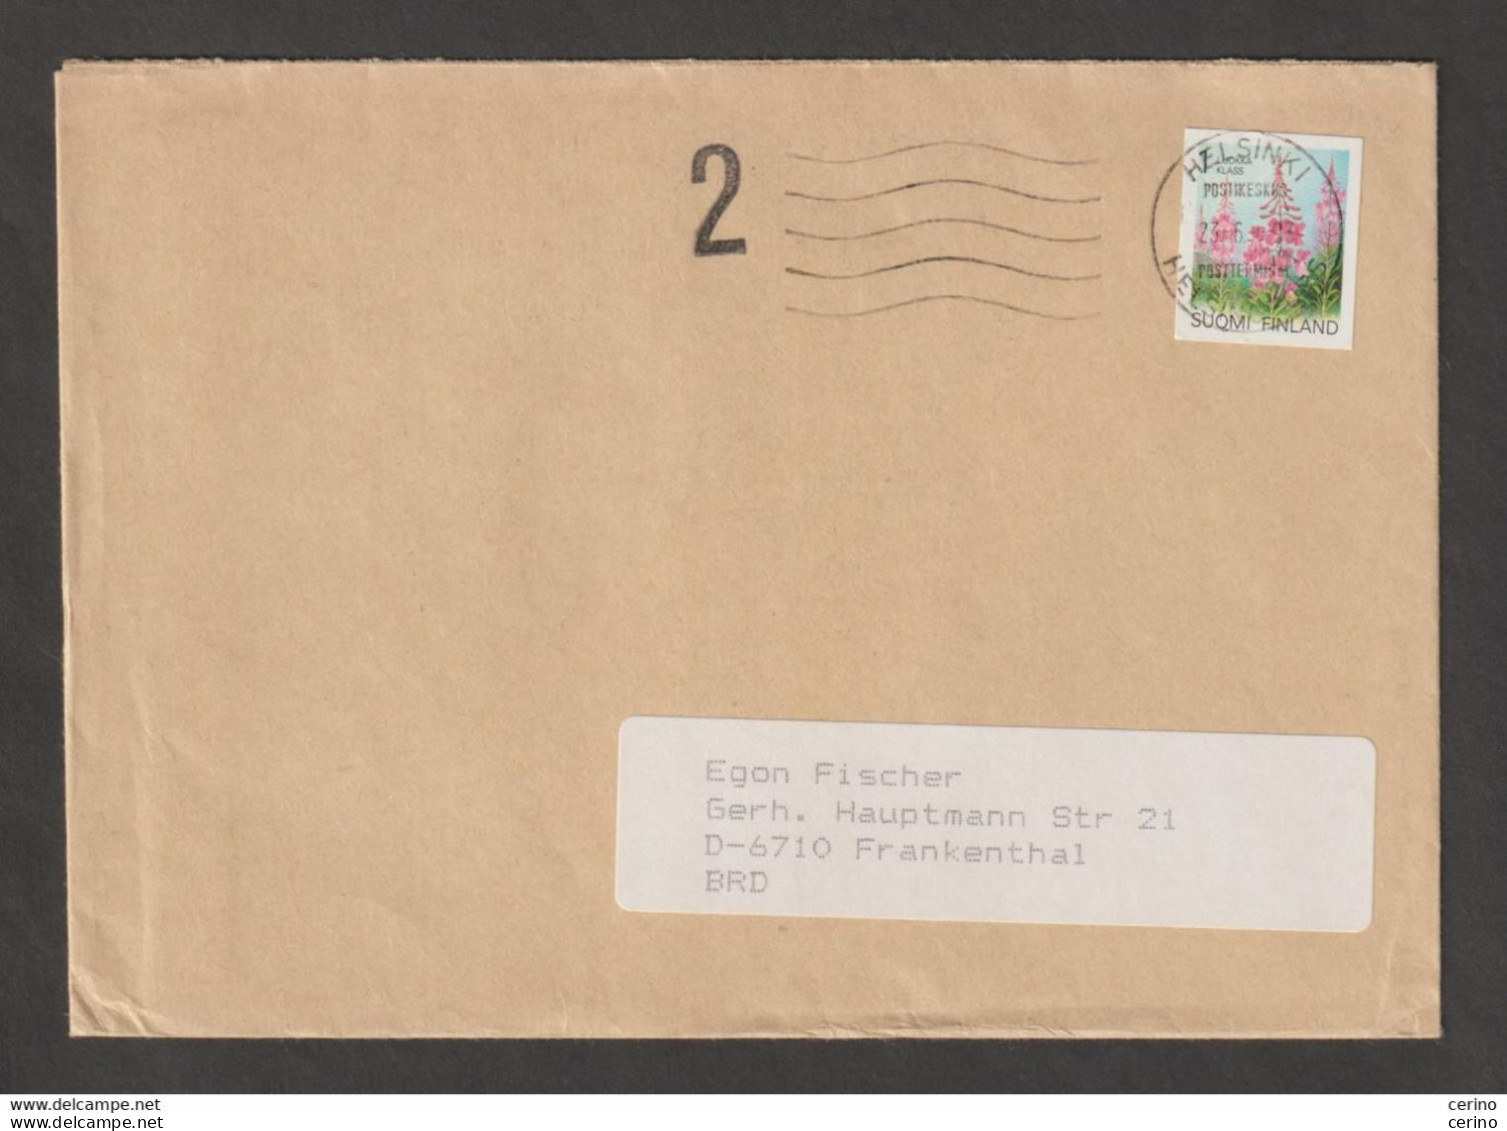 FINLAND:  1993  COVER   WITH  SELF- ADHESIVE  2 M.10 (1155) -  TO  GERMANY - Covers & Documents